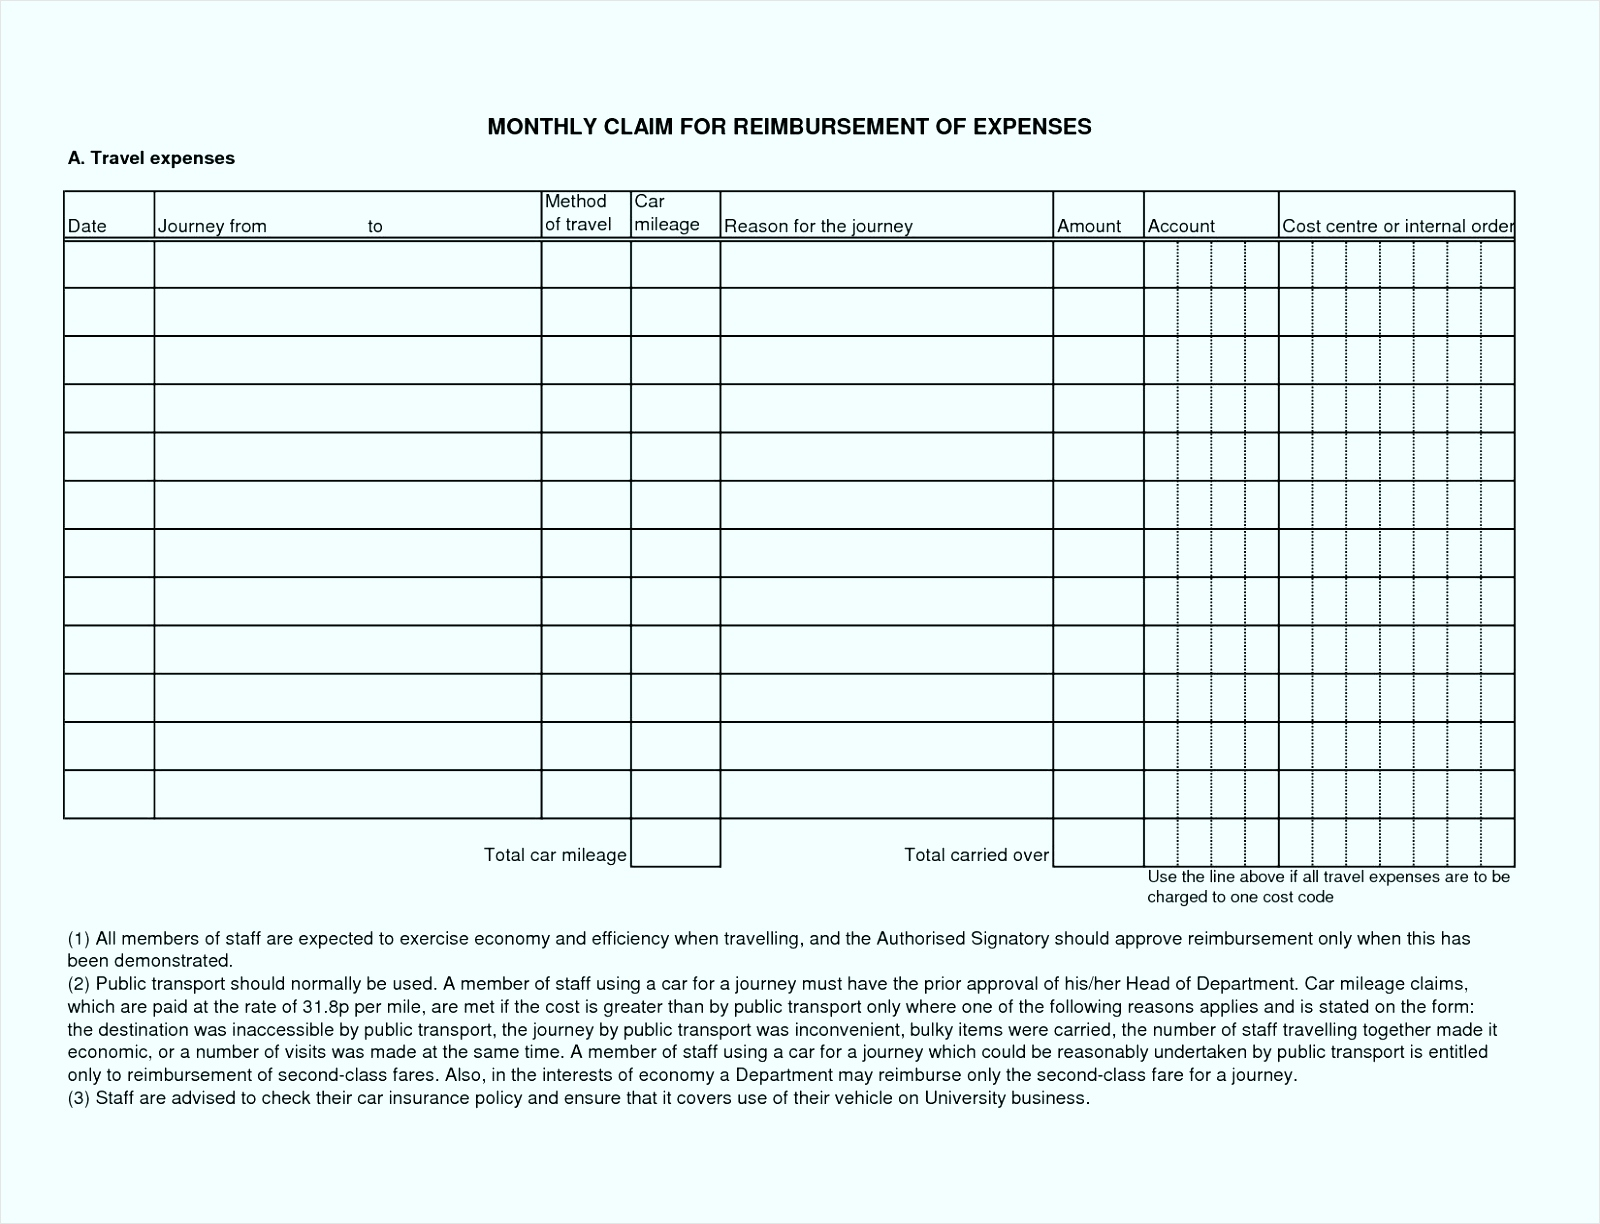 Business Mileage Claim Form Template Gallery - Business Cards Ideas throughout Business Expenses Claim Form Template